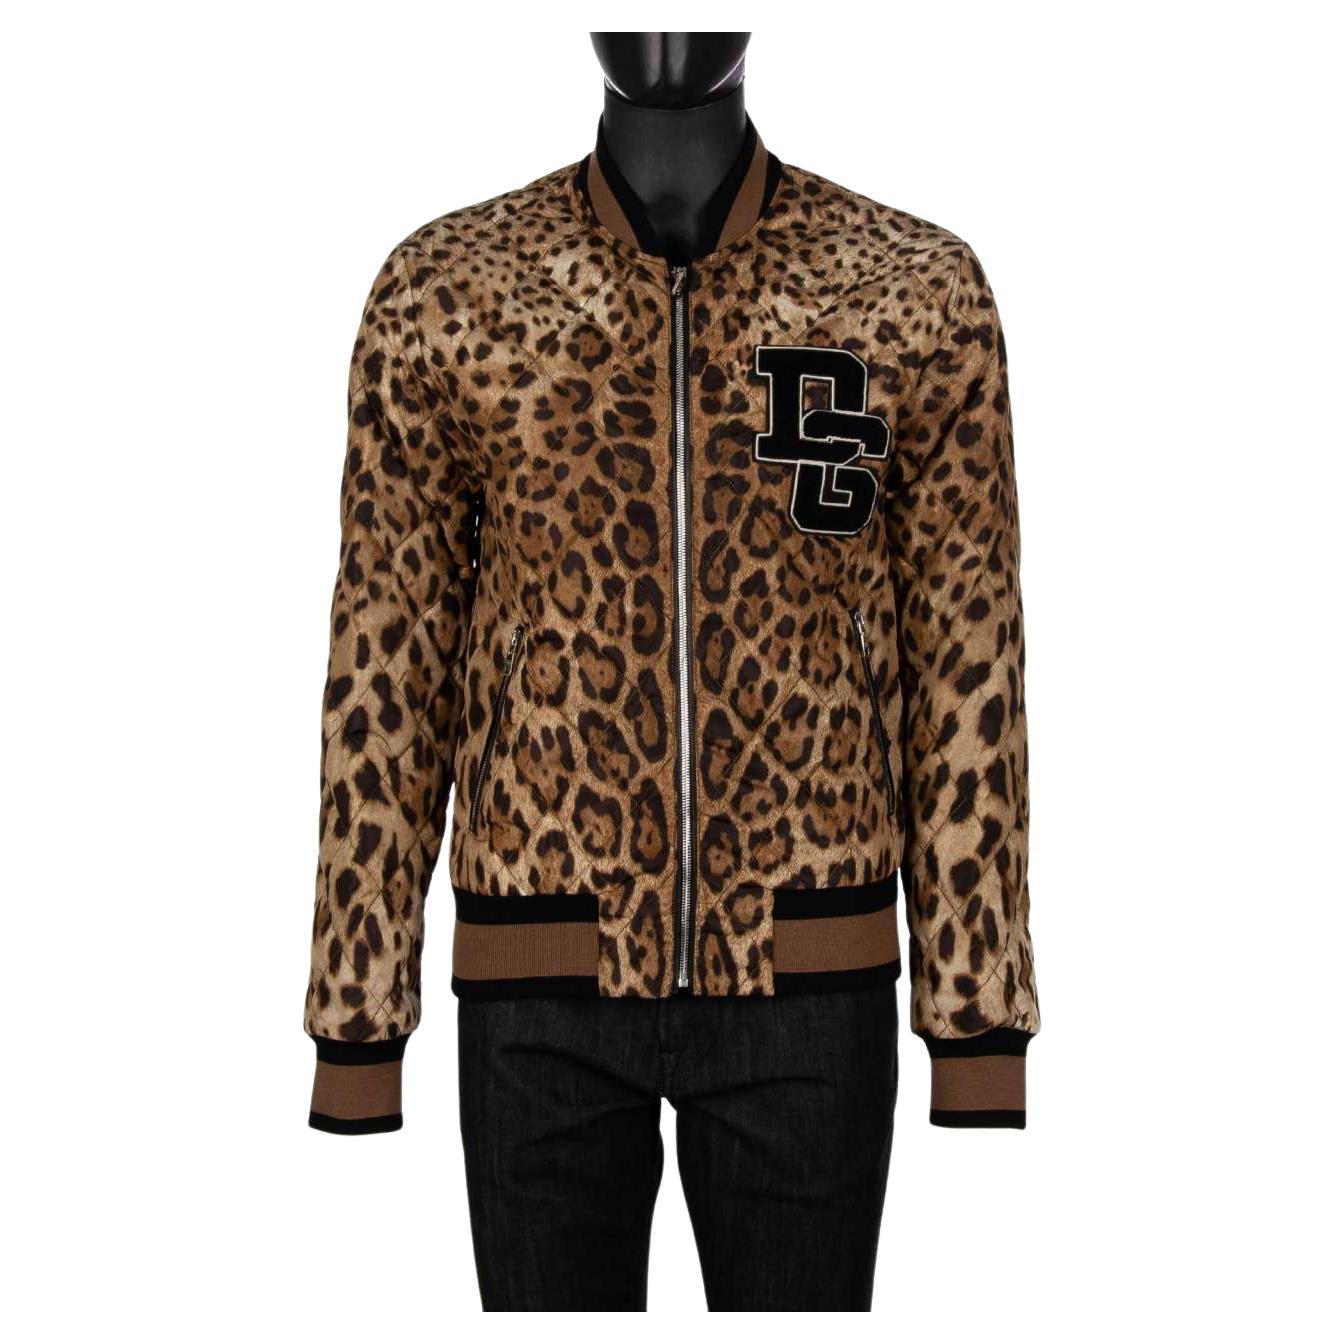 D&G Quilted Leopard Printed Nylon Bomber Jacket with DG Logo Brown Black 52 For Sale